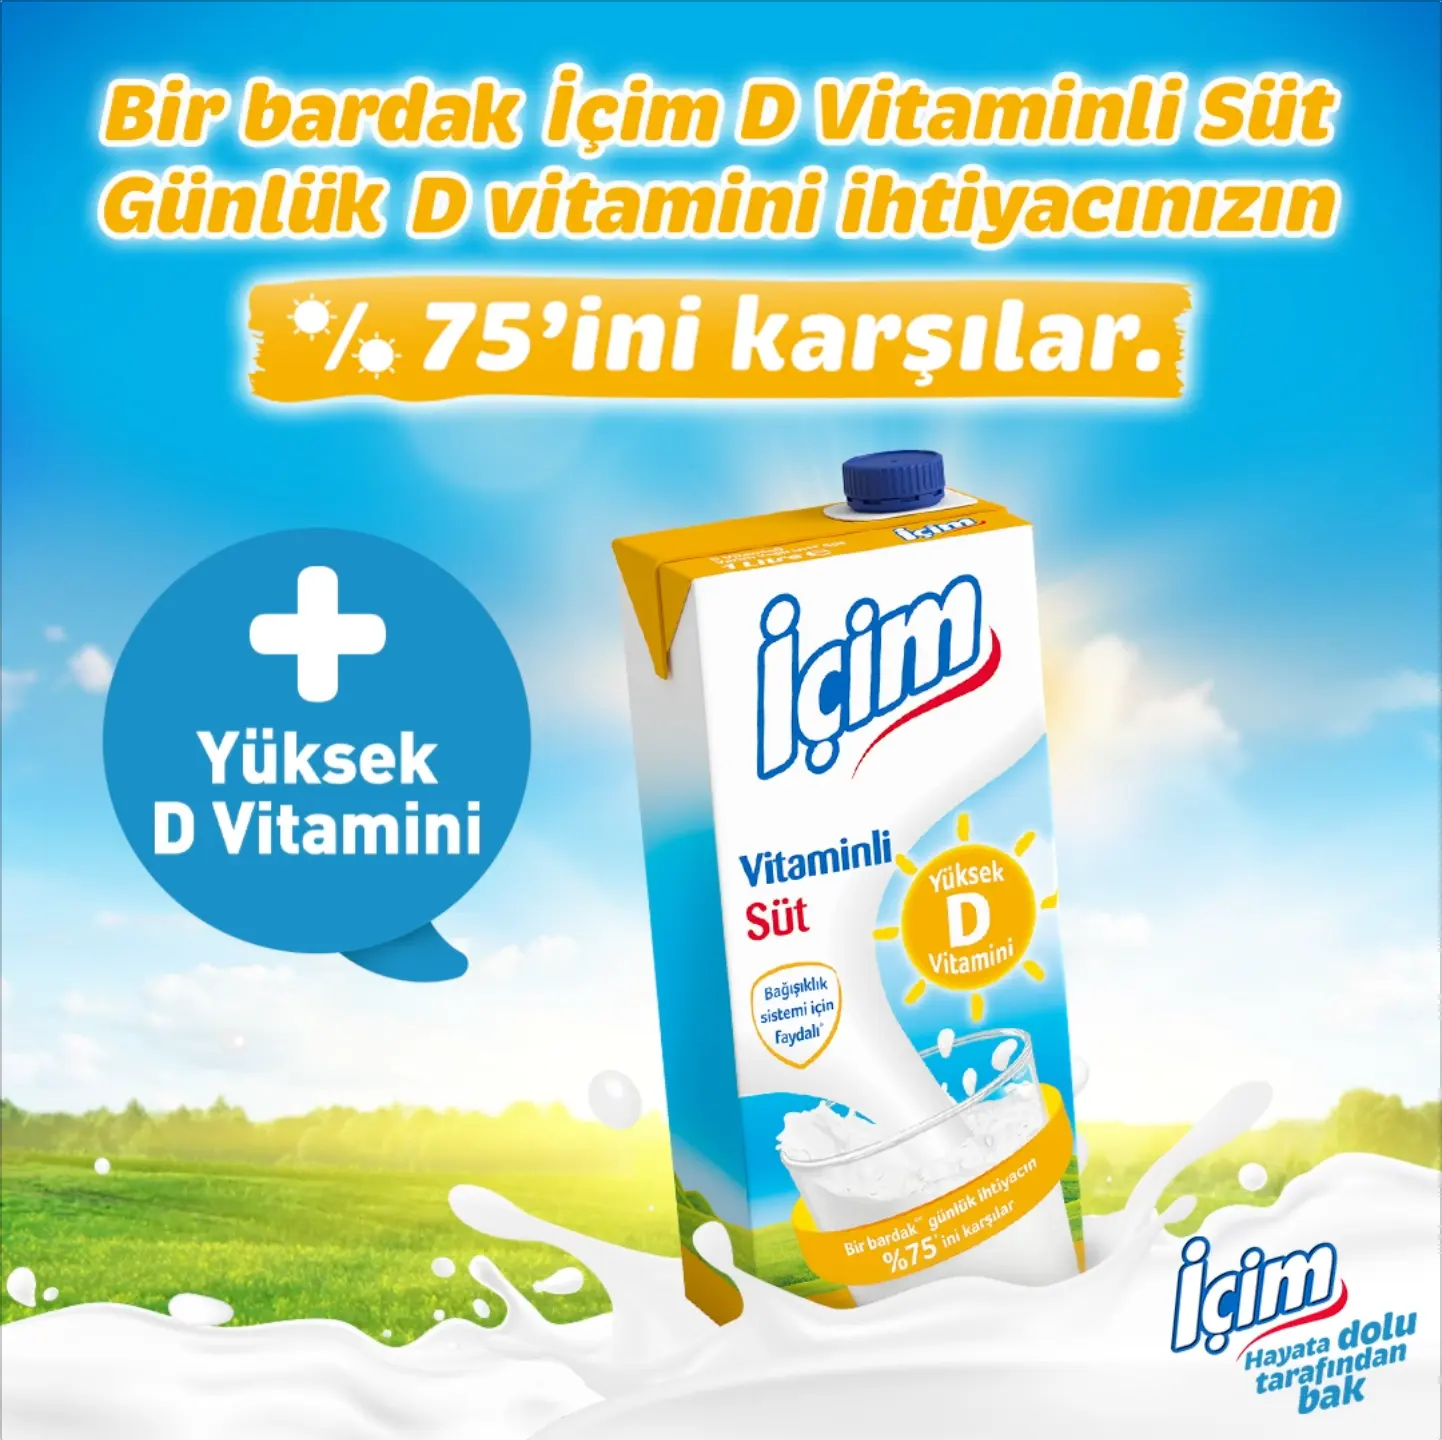 New milk from İçim for 75 percent of daily vitamin D needs